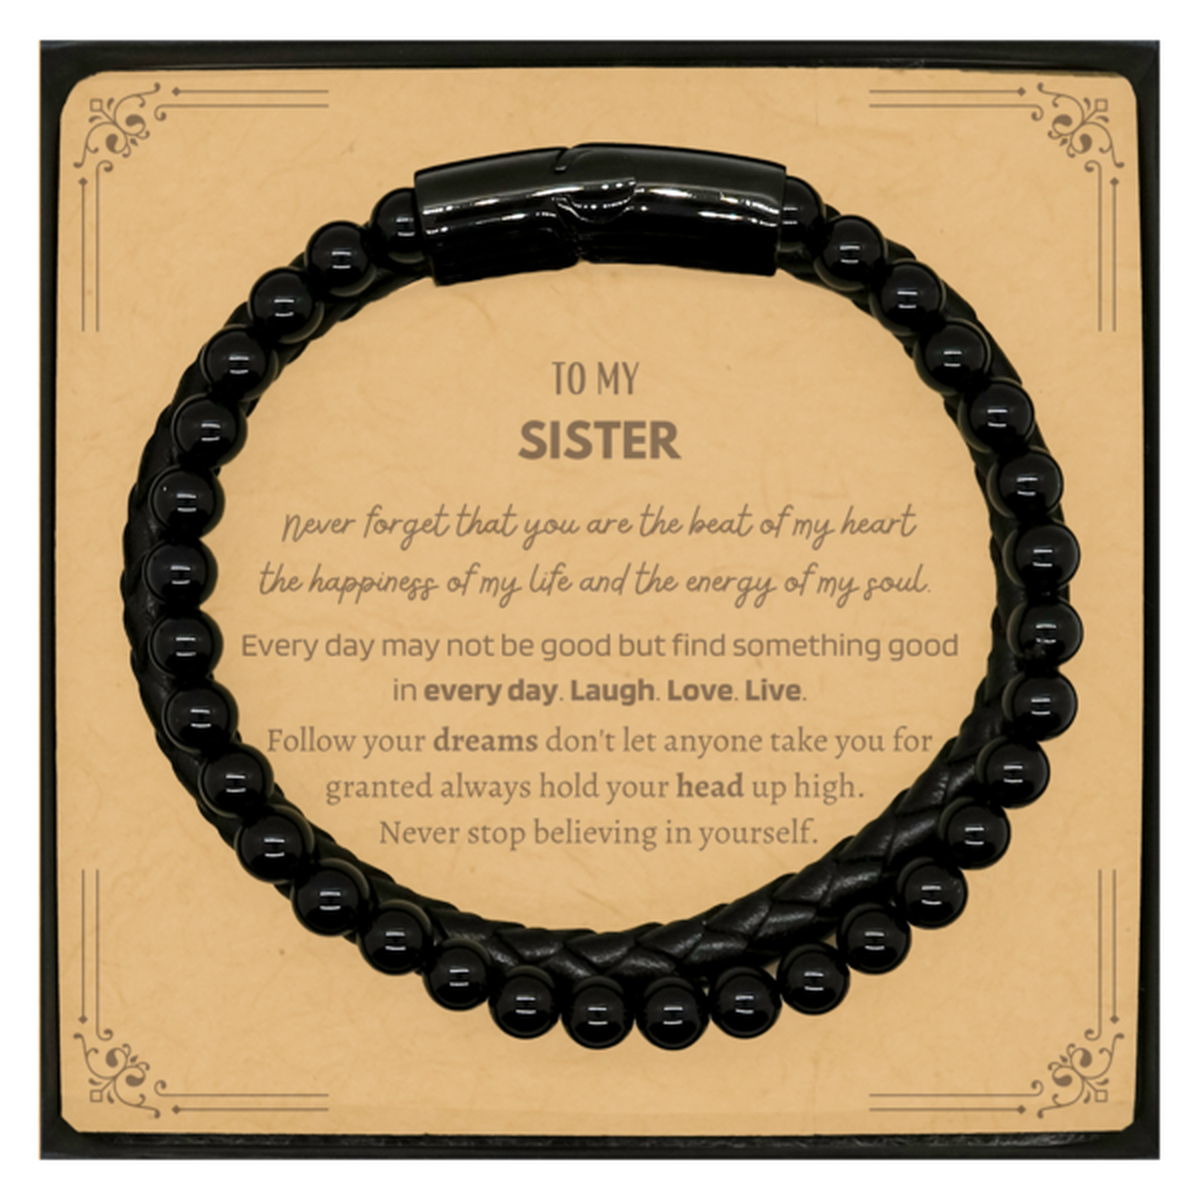 To My Sister Message Card Gifts, Christmas Sister Stone Leather Bracelets Present, Birthday Unique Motivational For Sister, To My Sister Never forget that you are the beat of my heart the happiness of my life and the energy of my soul